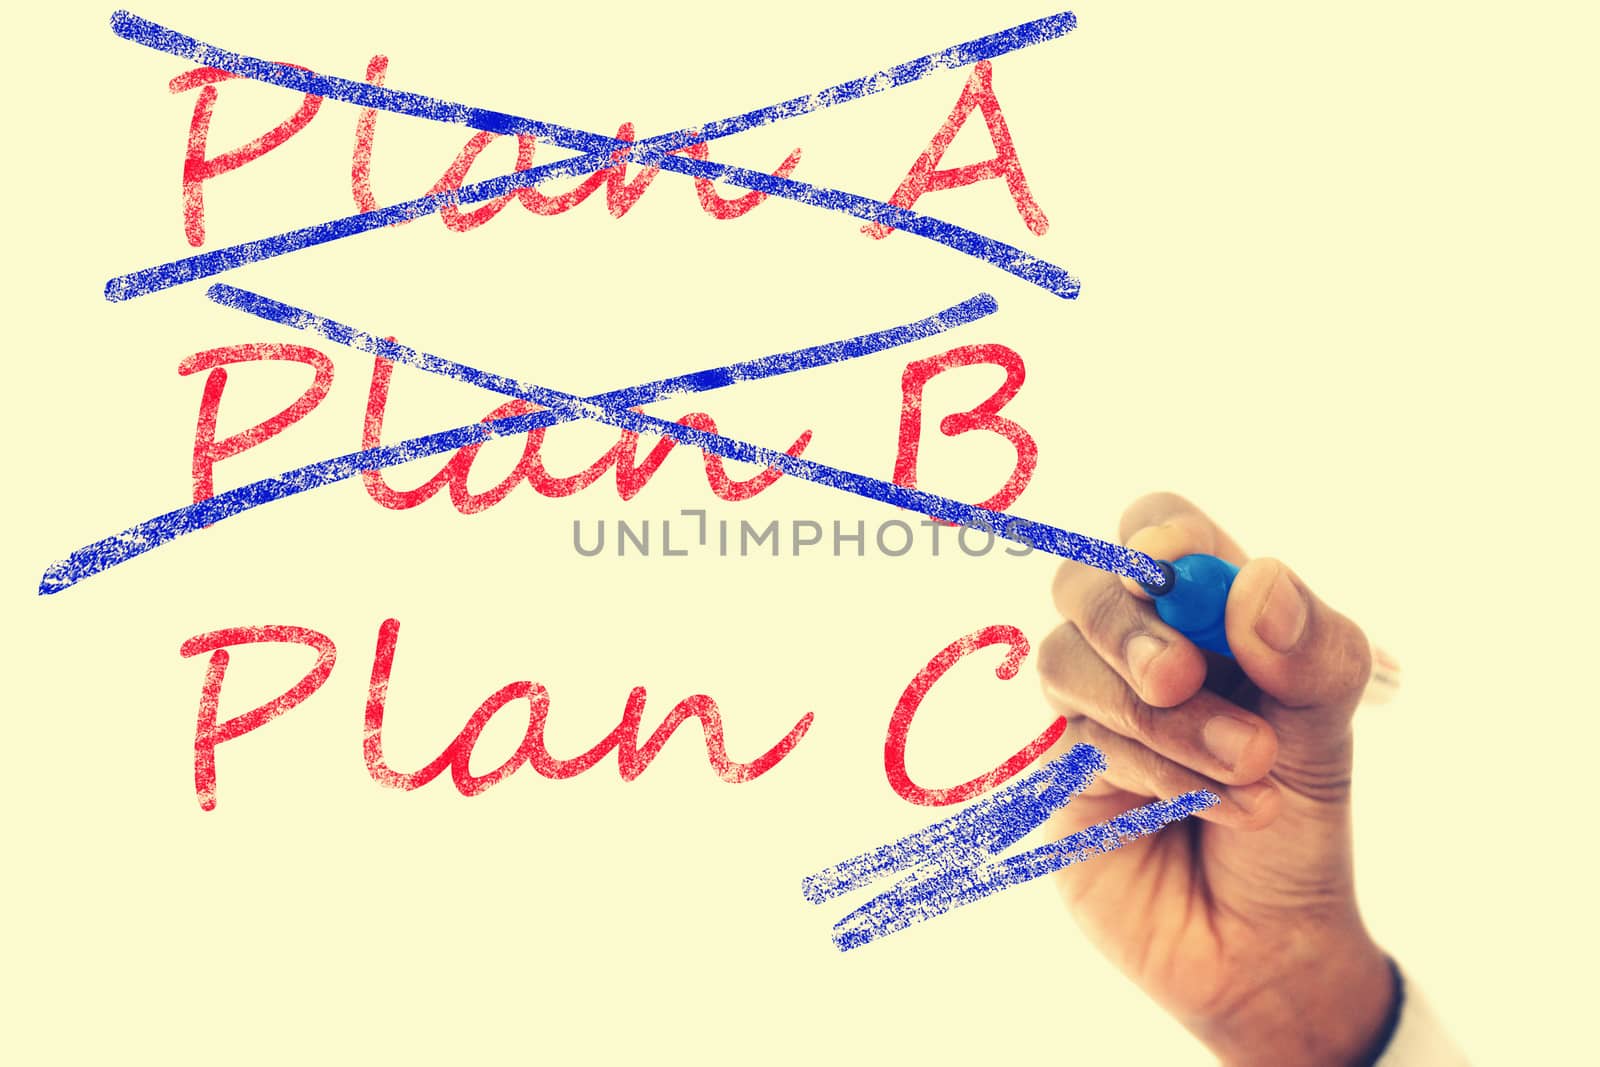 Plan A and B crossed, Plan C take over by yands